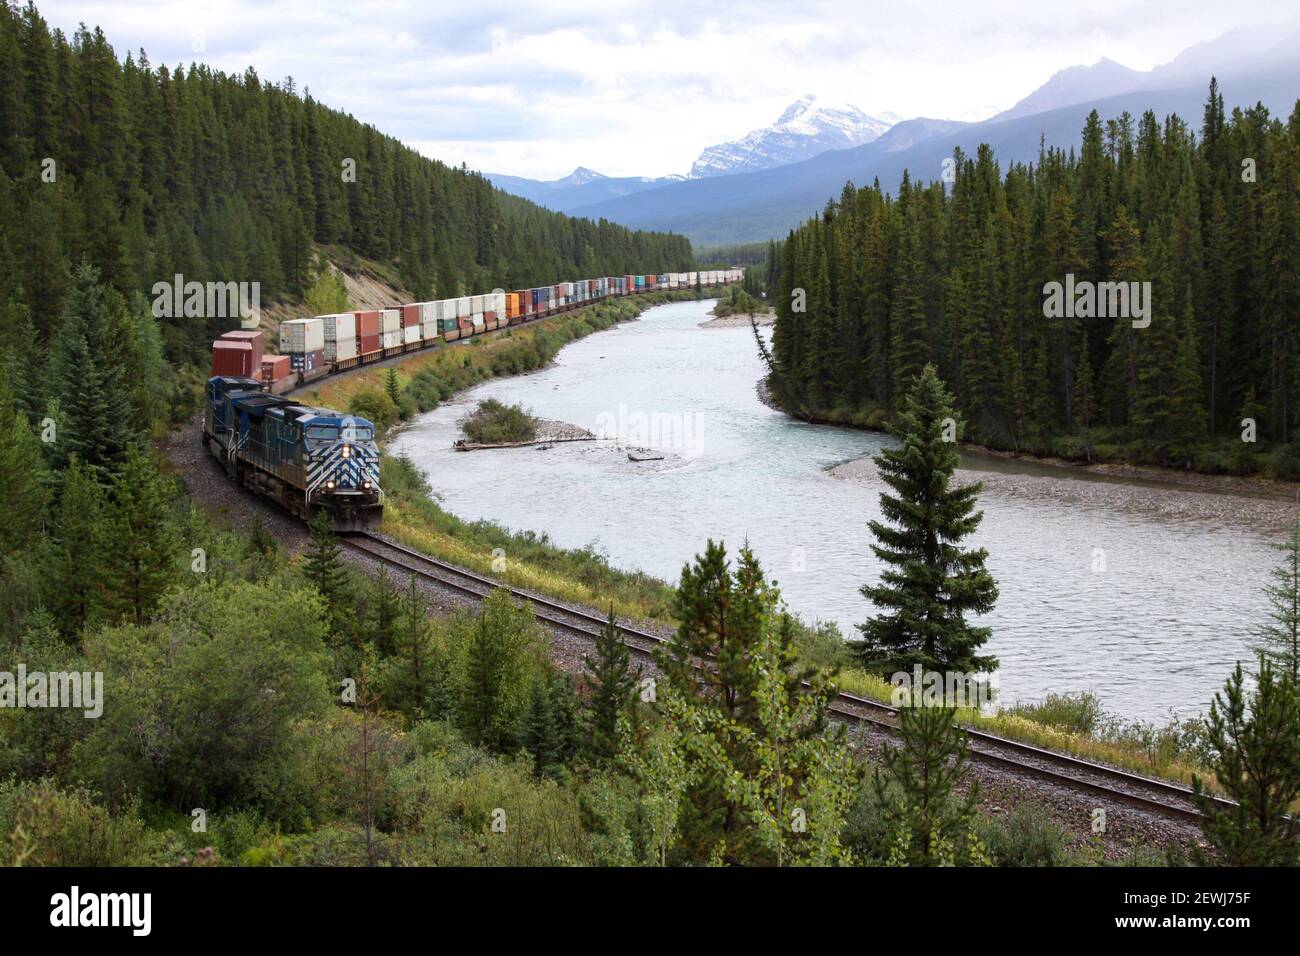 Long train with many cars in Rocky Mountains. Stock Photo